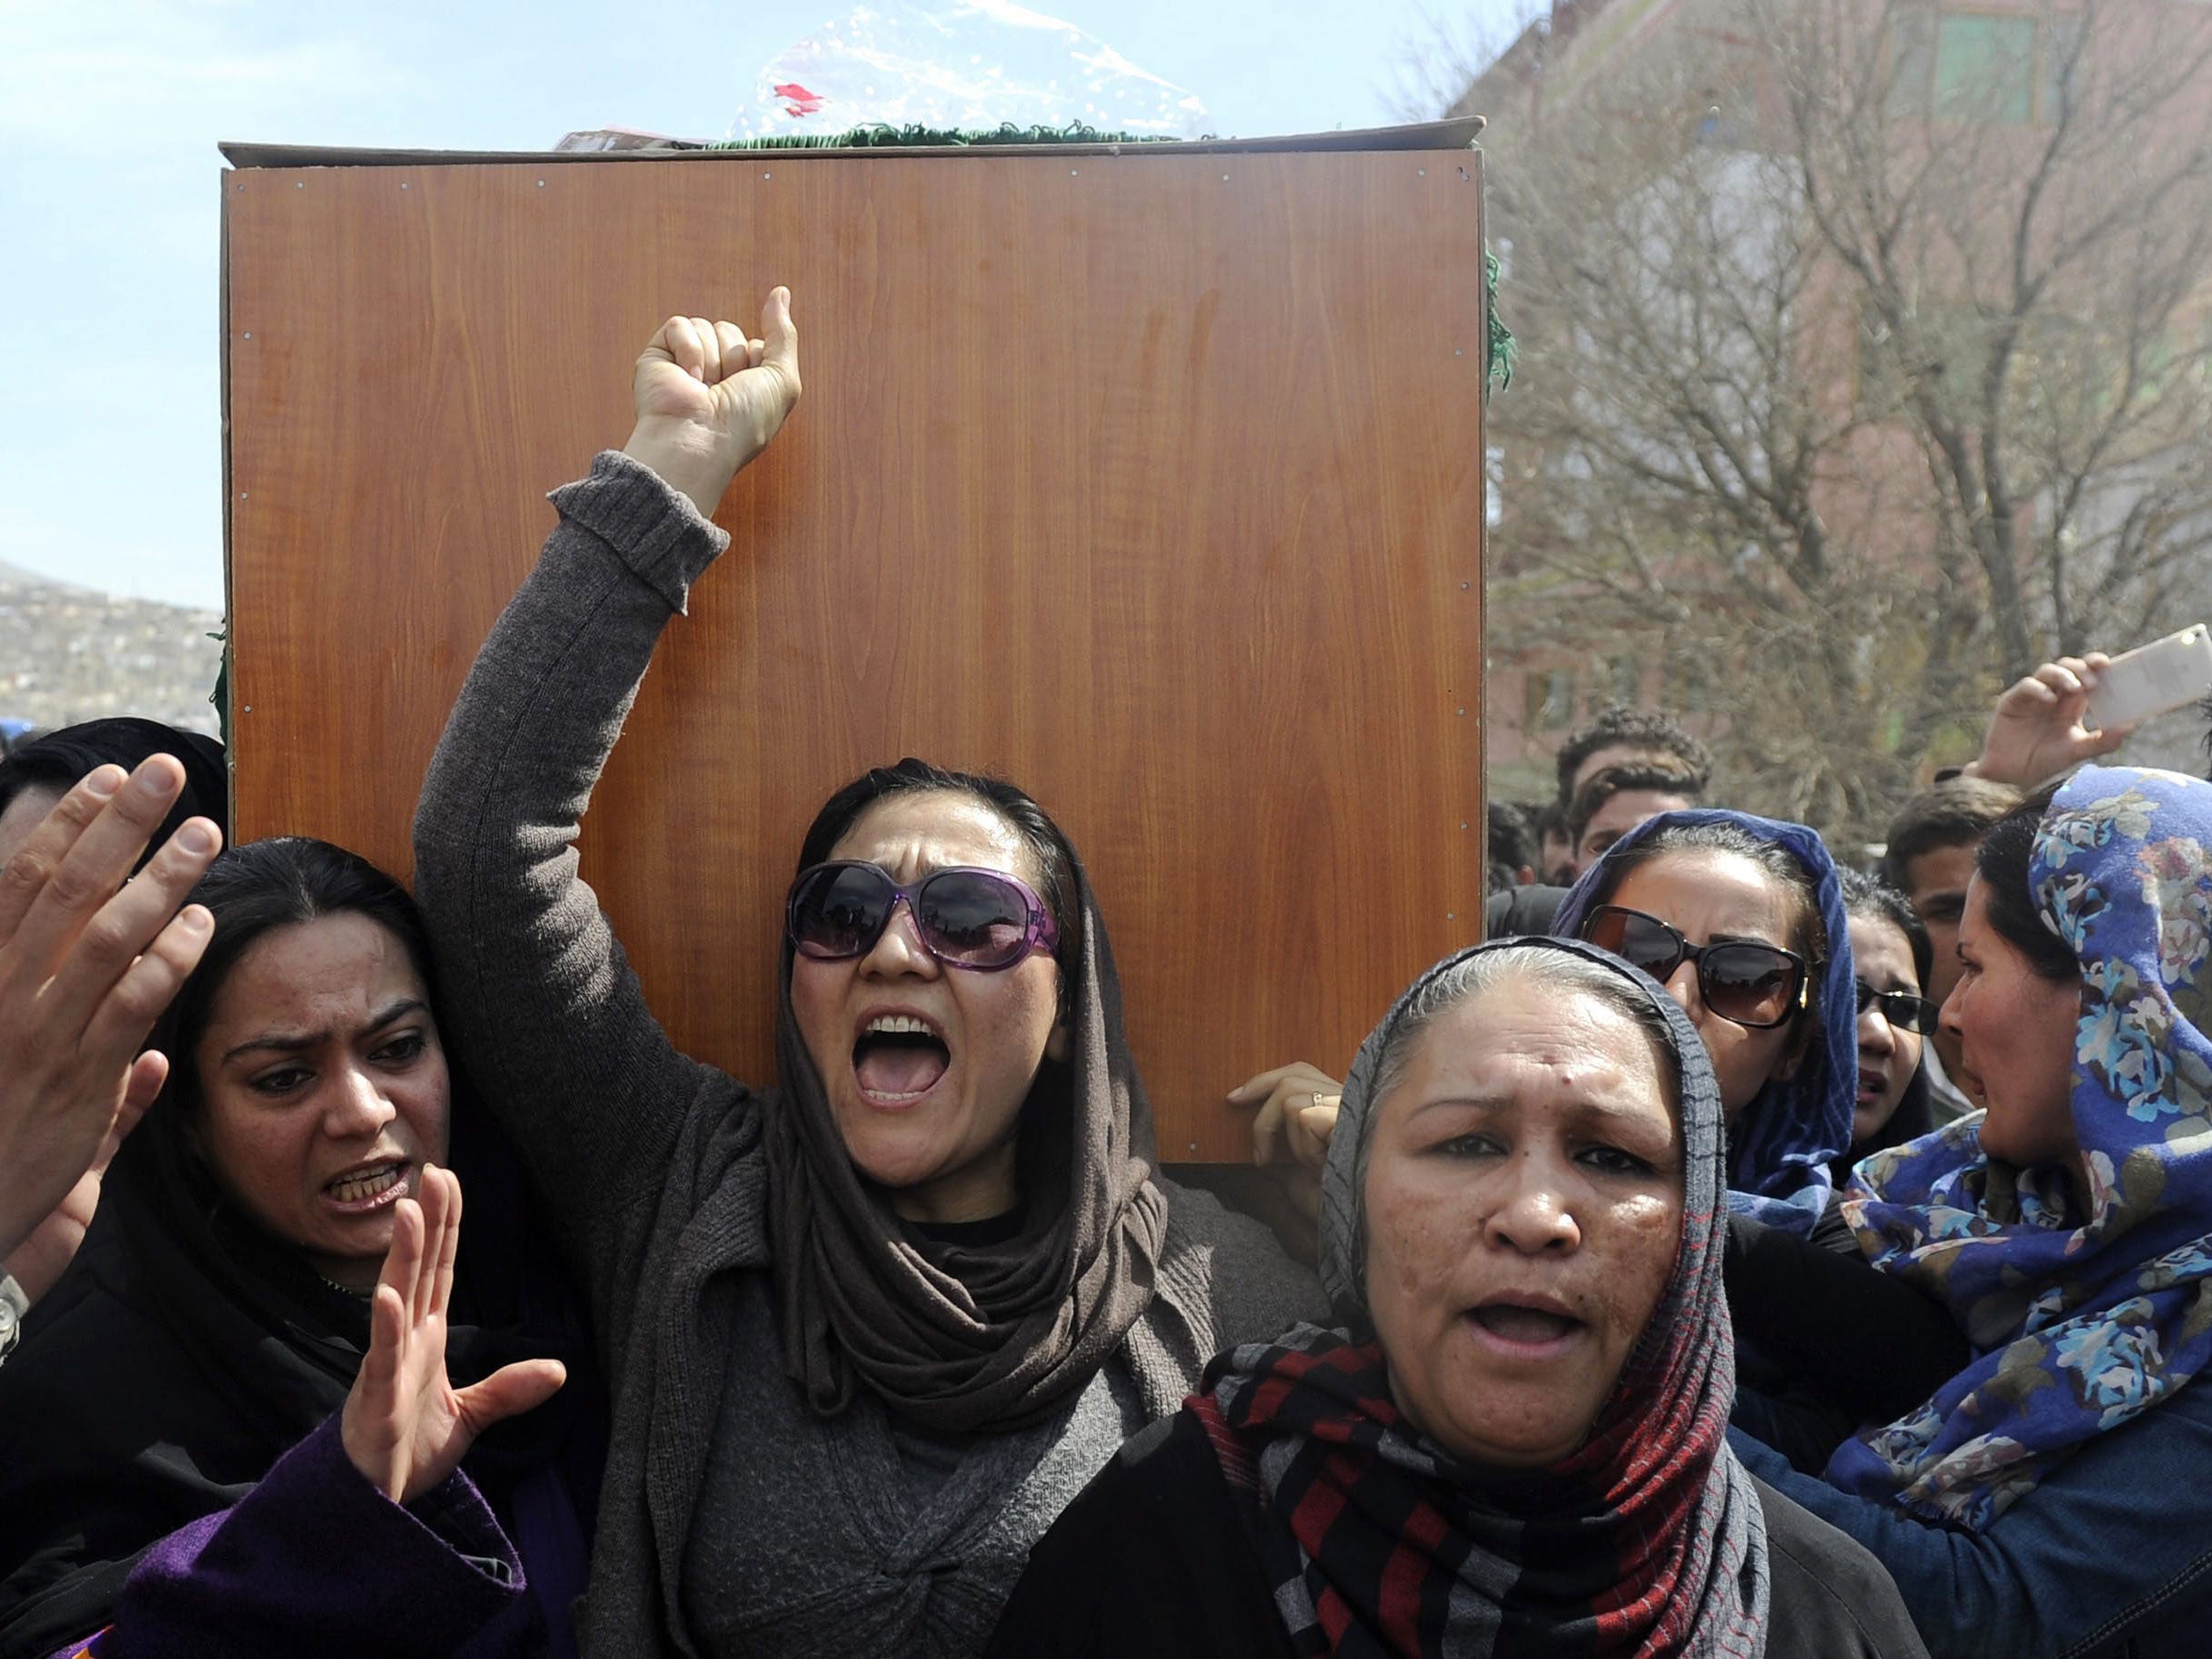 Farkhunda's burial was attended by scores - many of who chanted 'we want justice'